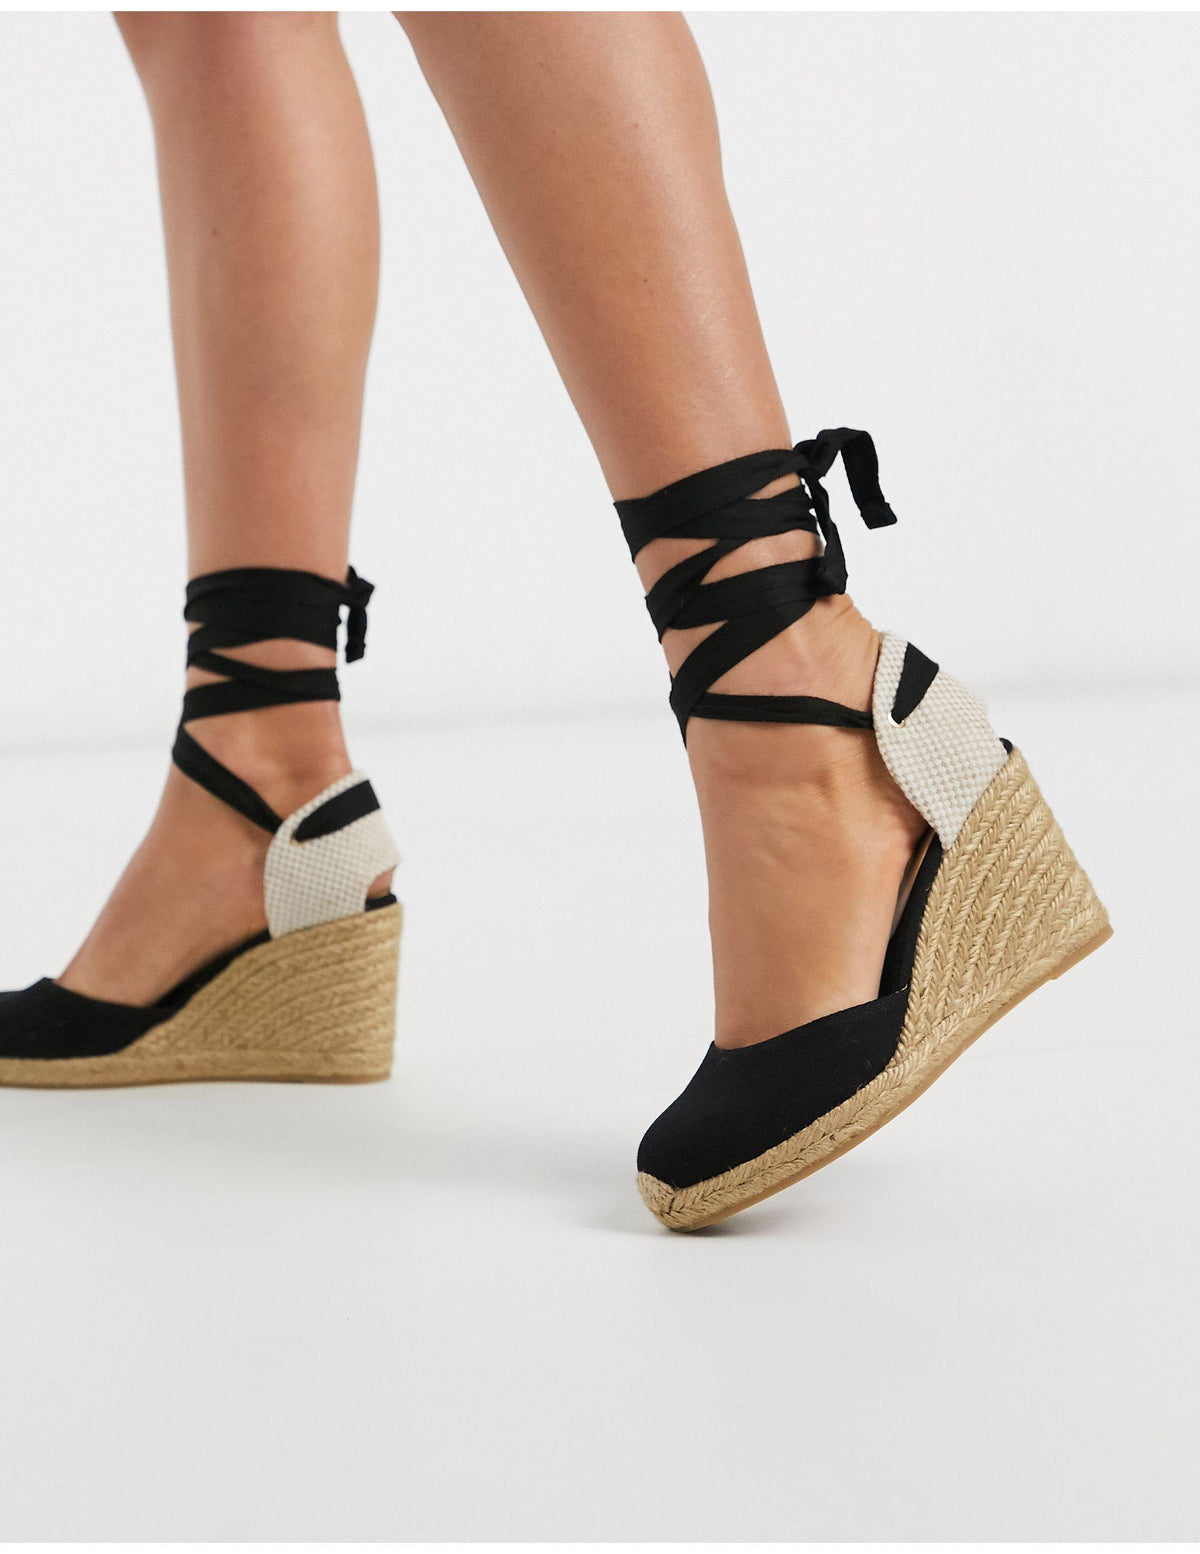 Minimalism and Gaudiness: How to Style Espadrilles